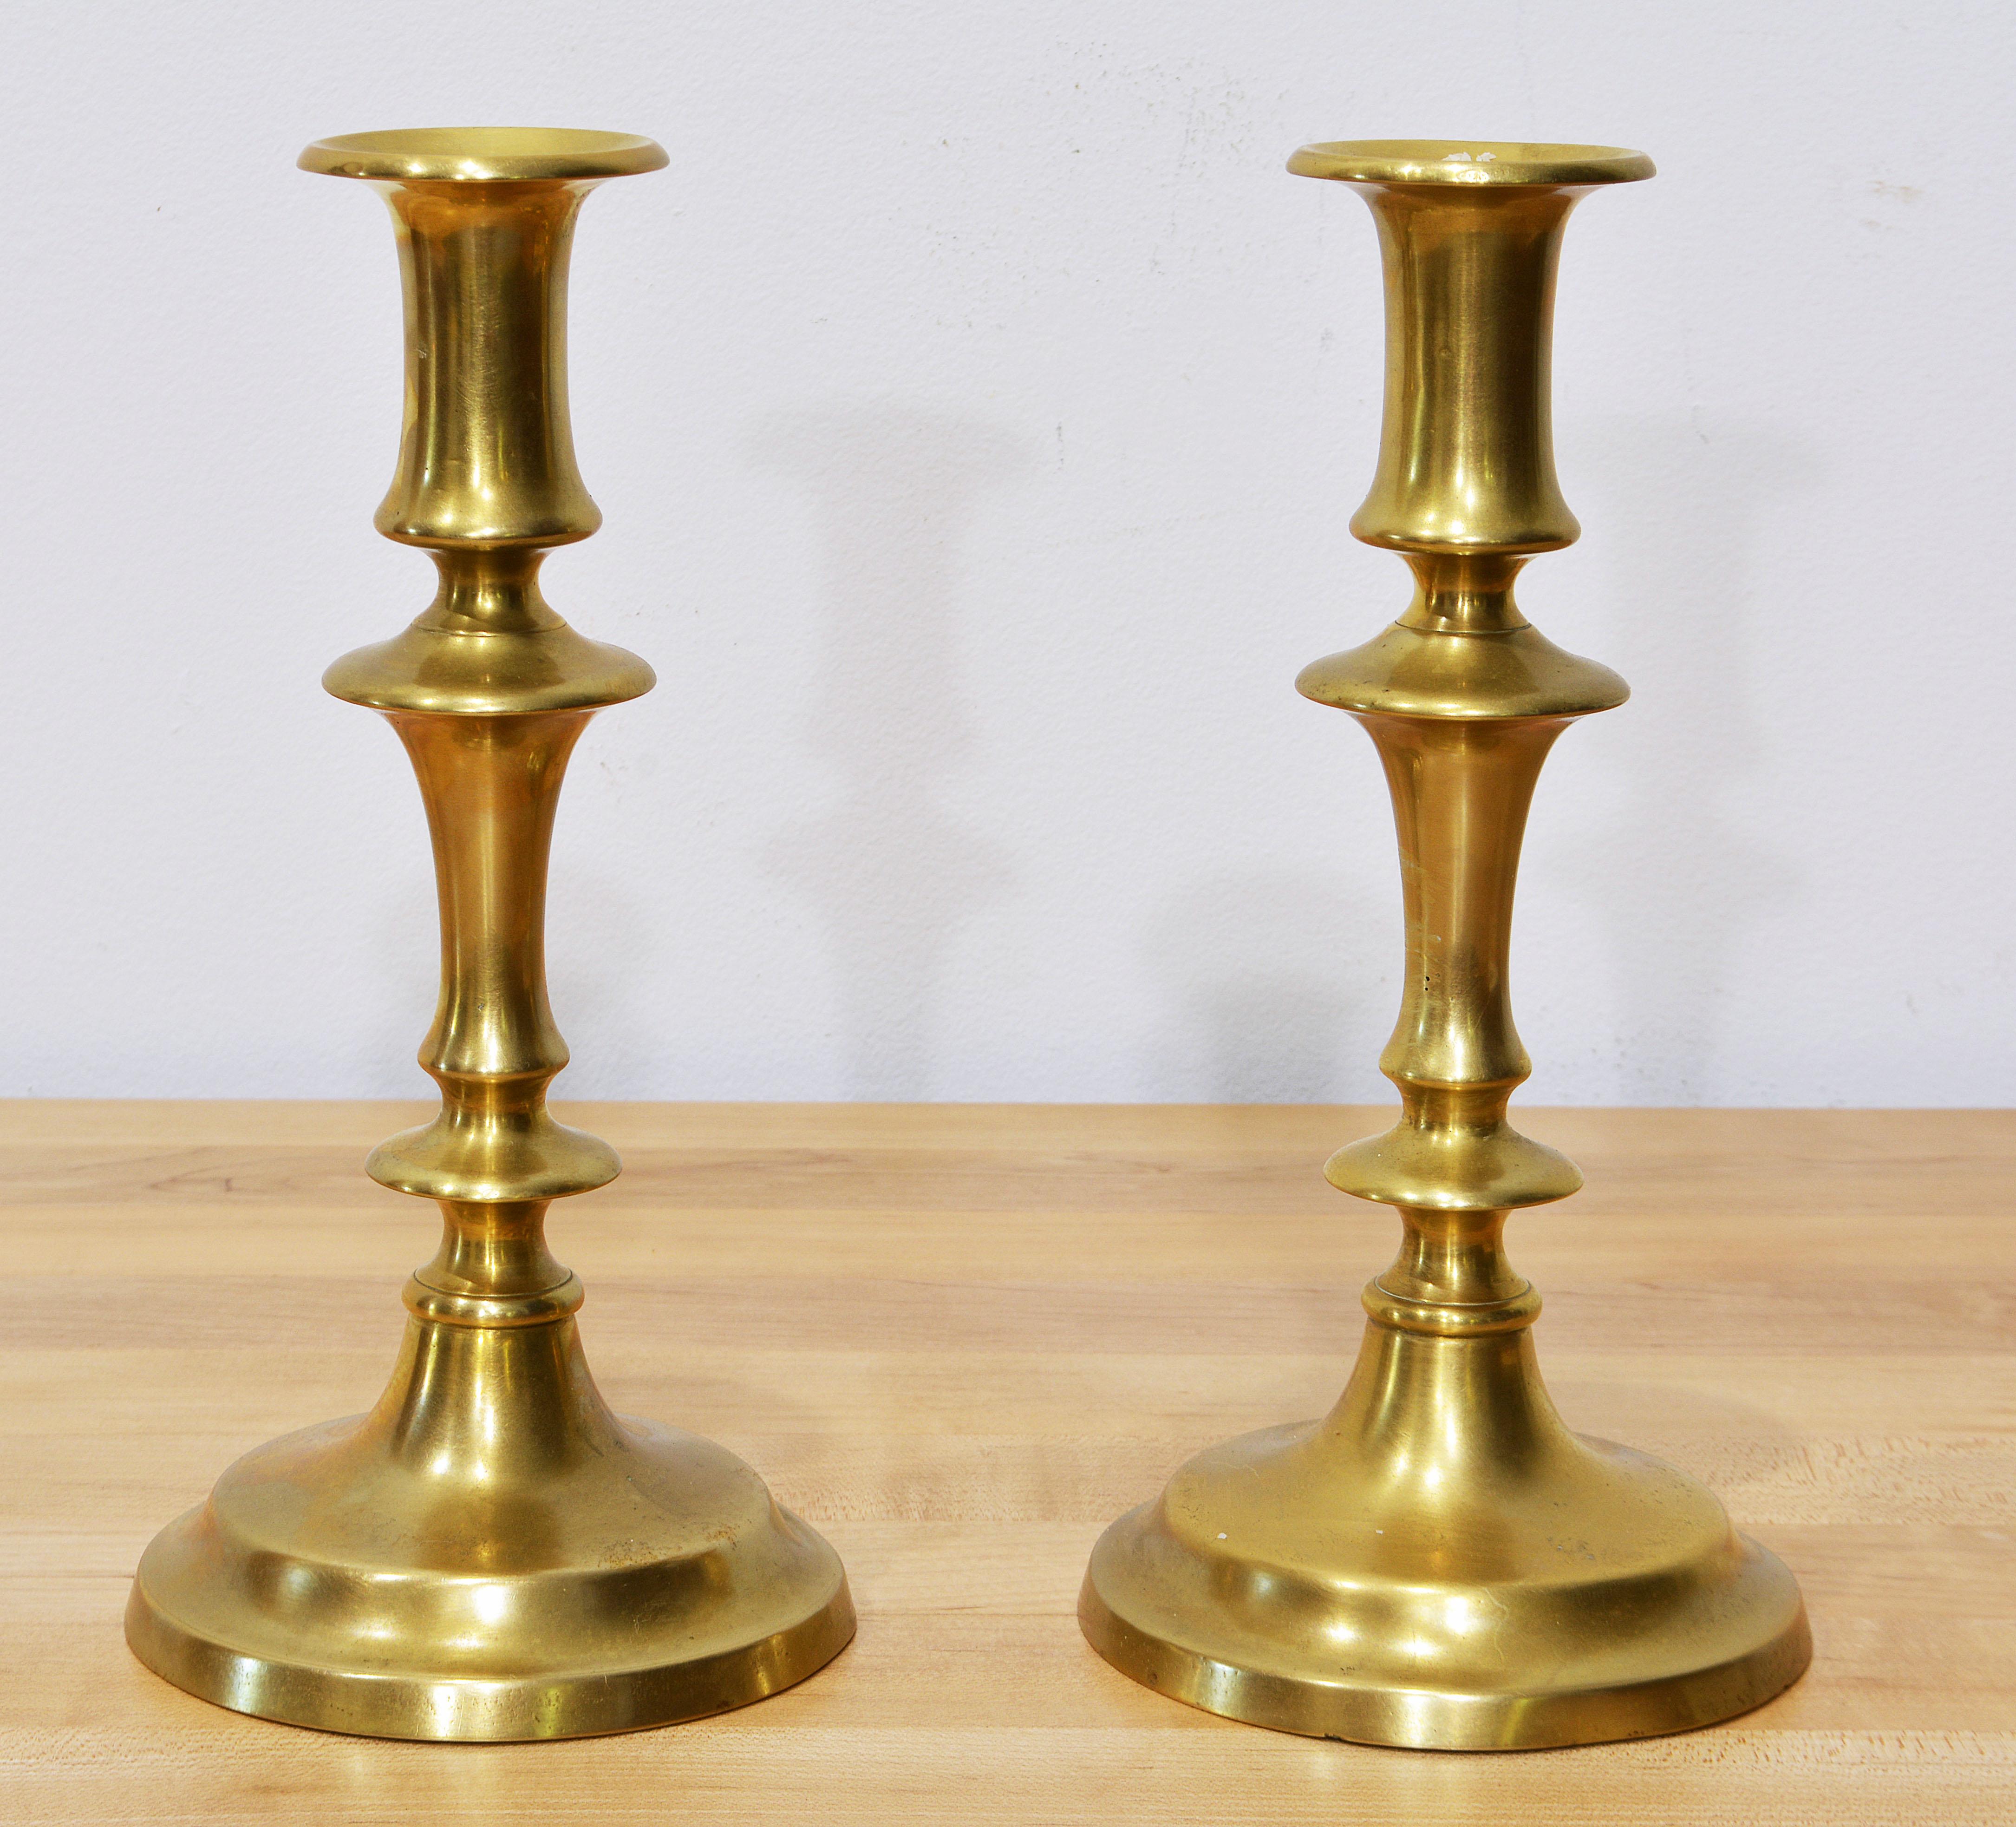 Pair of 18th Century English Queen Anne Brass Candle Sticks with Shaped Stems 6